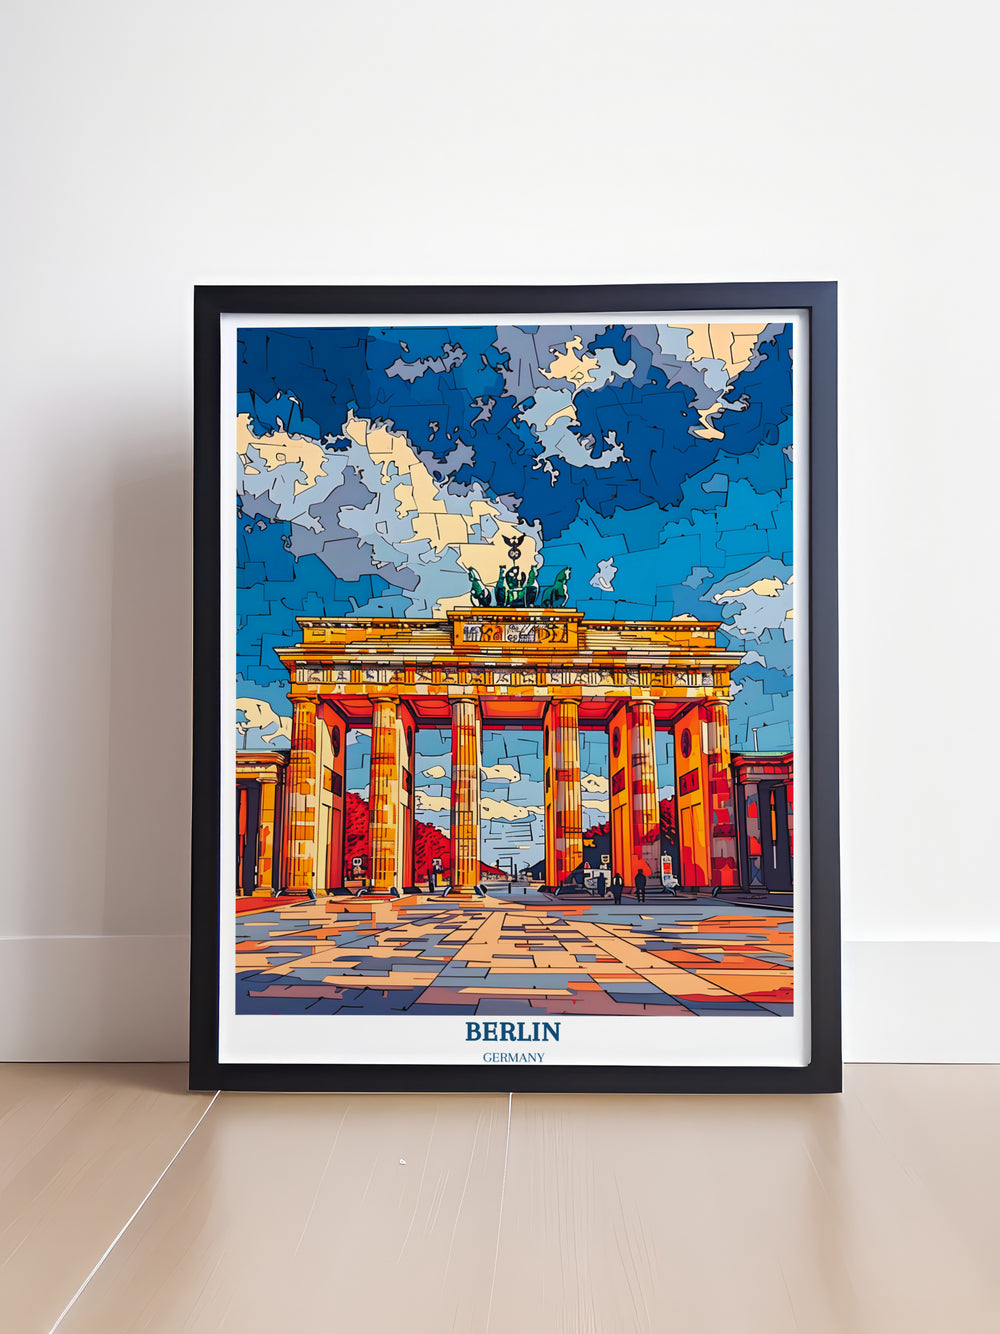 Brandenburg Gate - Germany Travel Gift: Symbol of unity in Berlins cityscape. Ideal personalized present for enthusiasts.